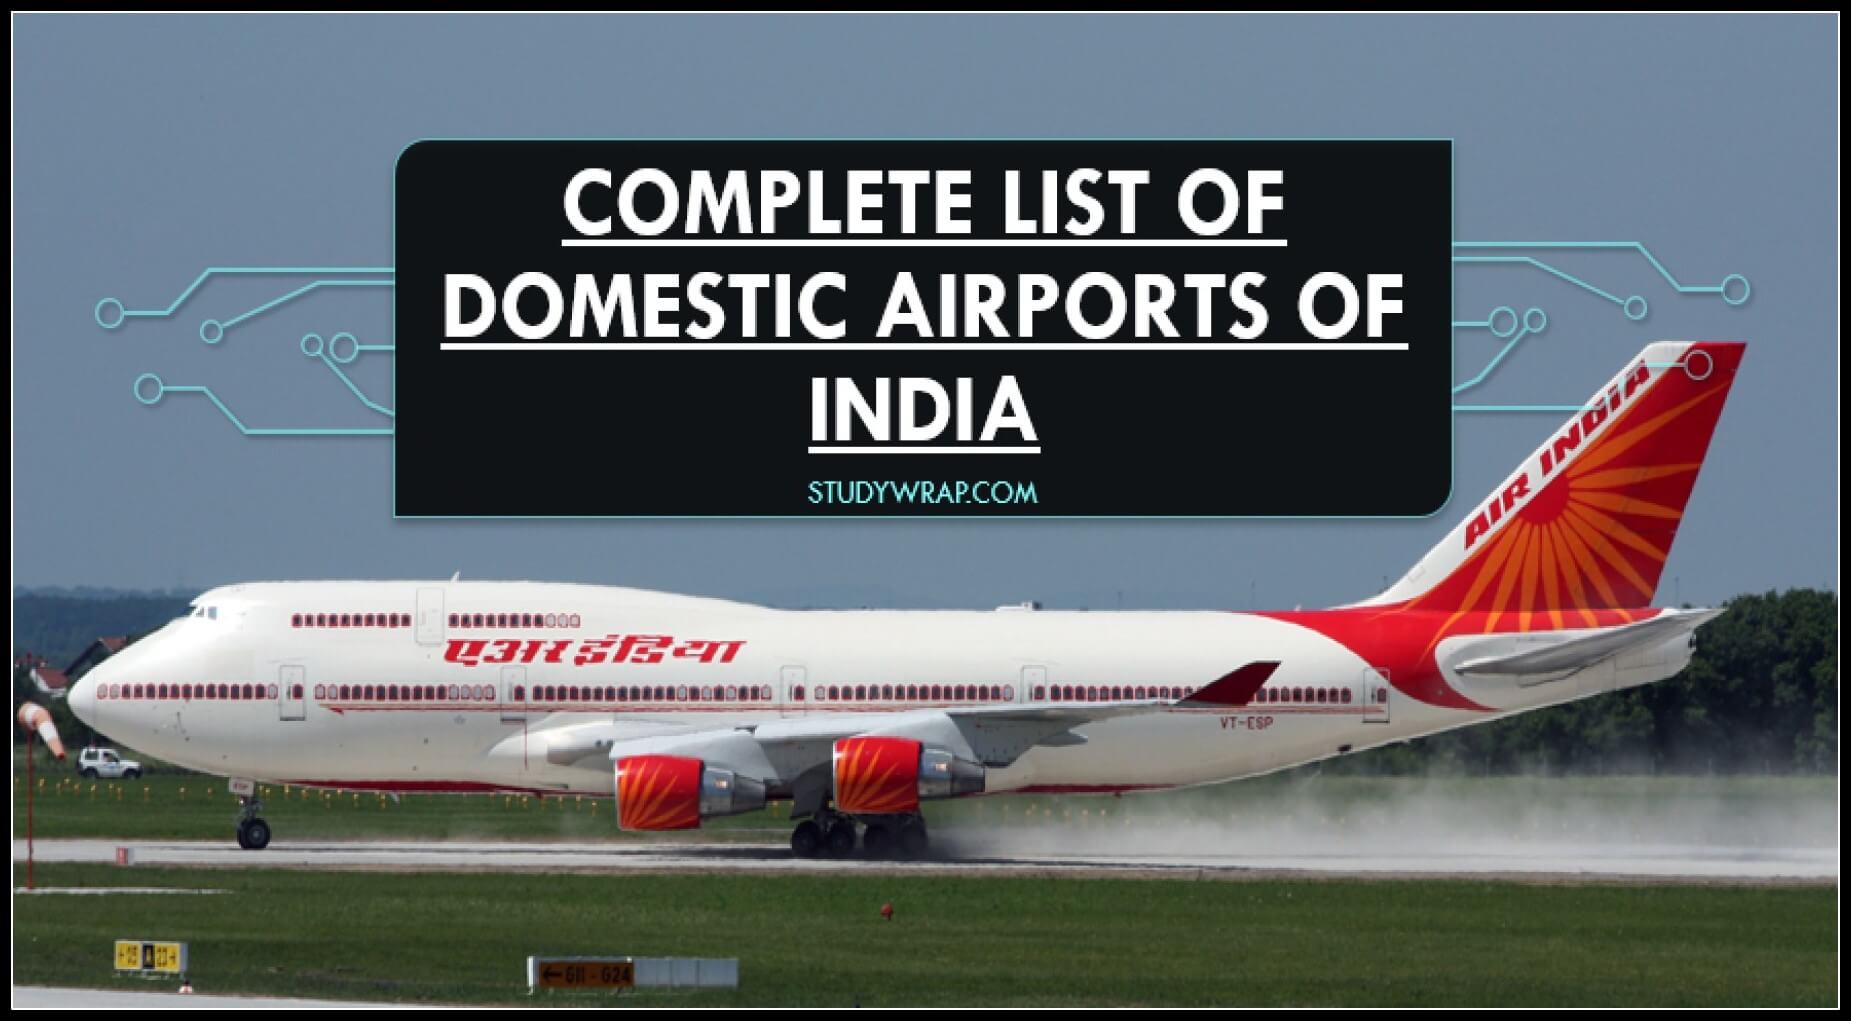 Complete List of Domestic Airports of India, List of Domestic Airports of India, Airports of India, History of Civil Aviation in India, Airport Authority of India...Complete Static GK notes on Studywrap.com